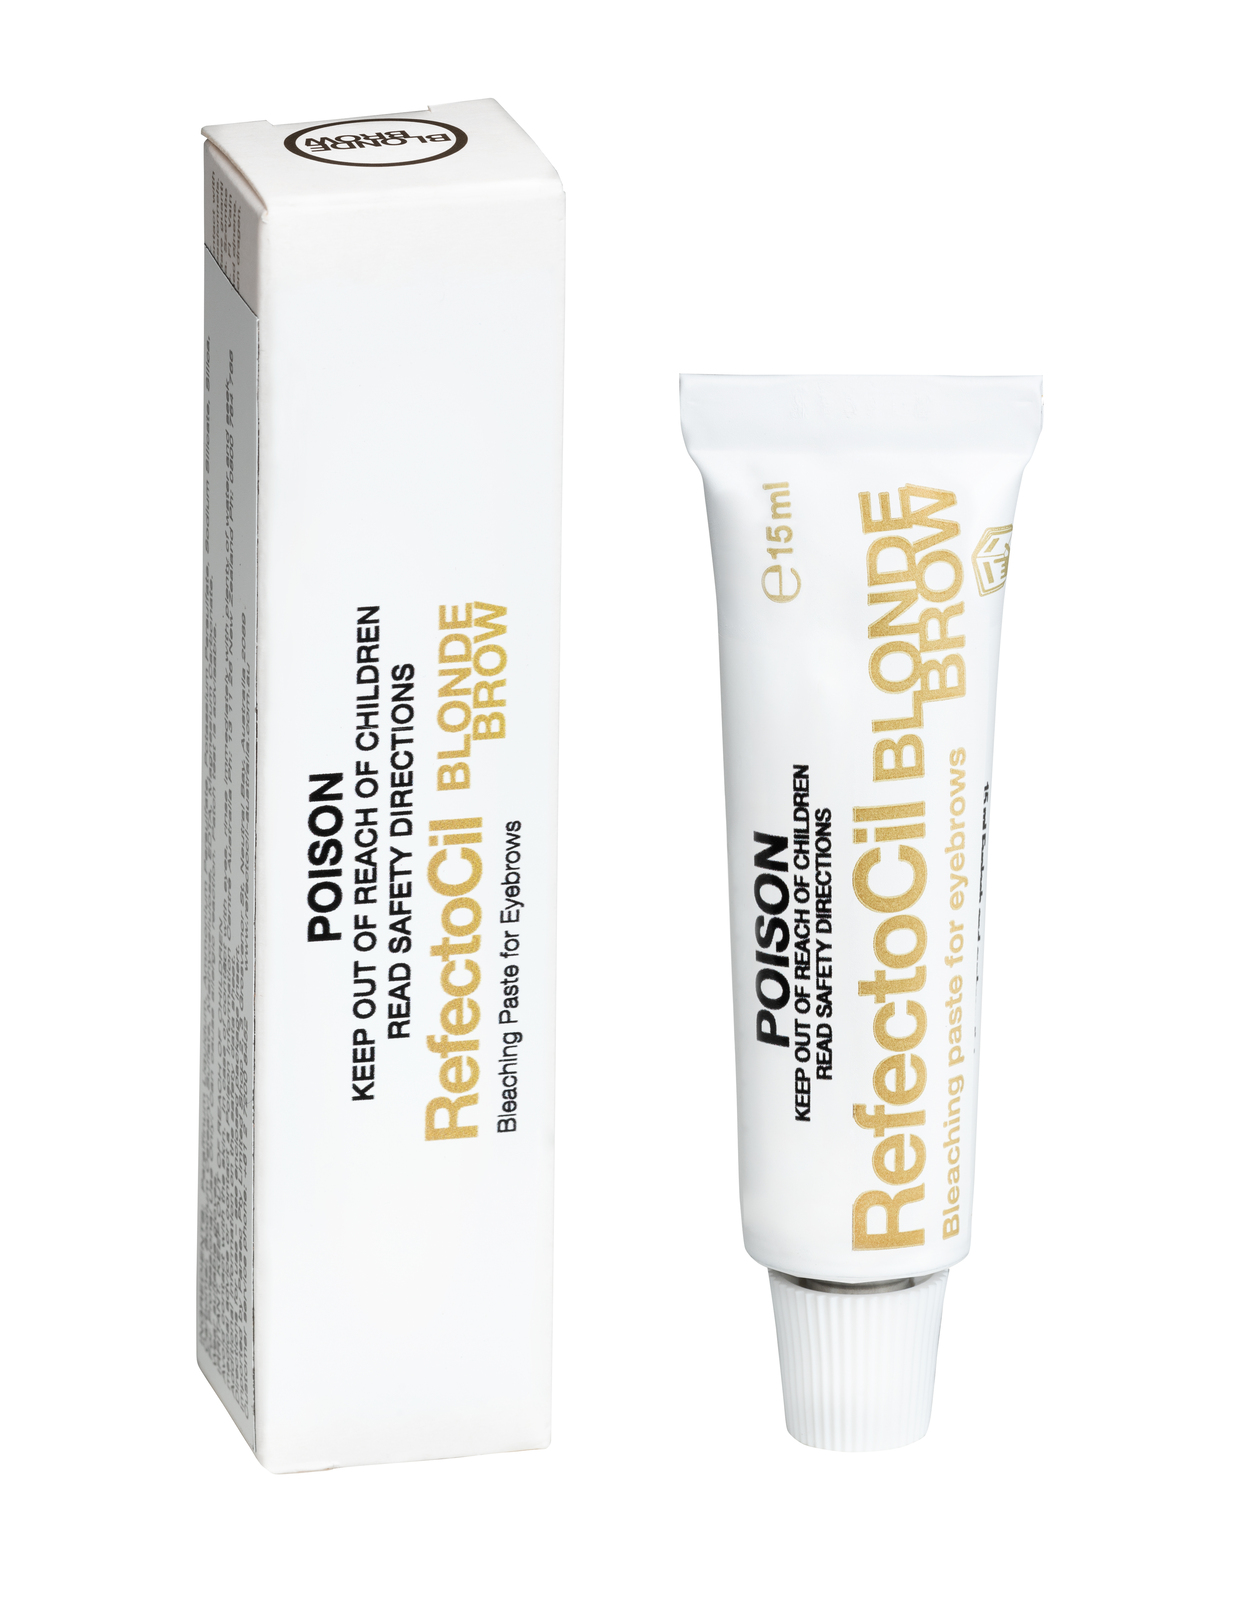 RefectoCil Blonde Brow Tint